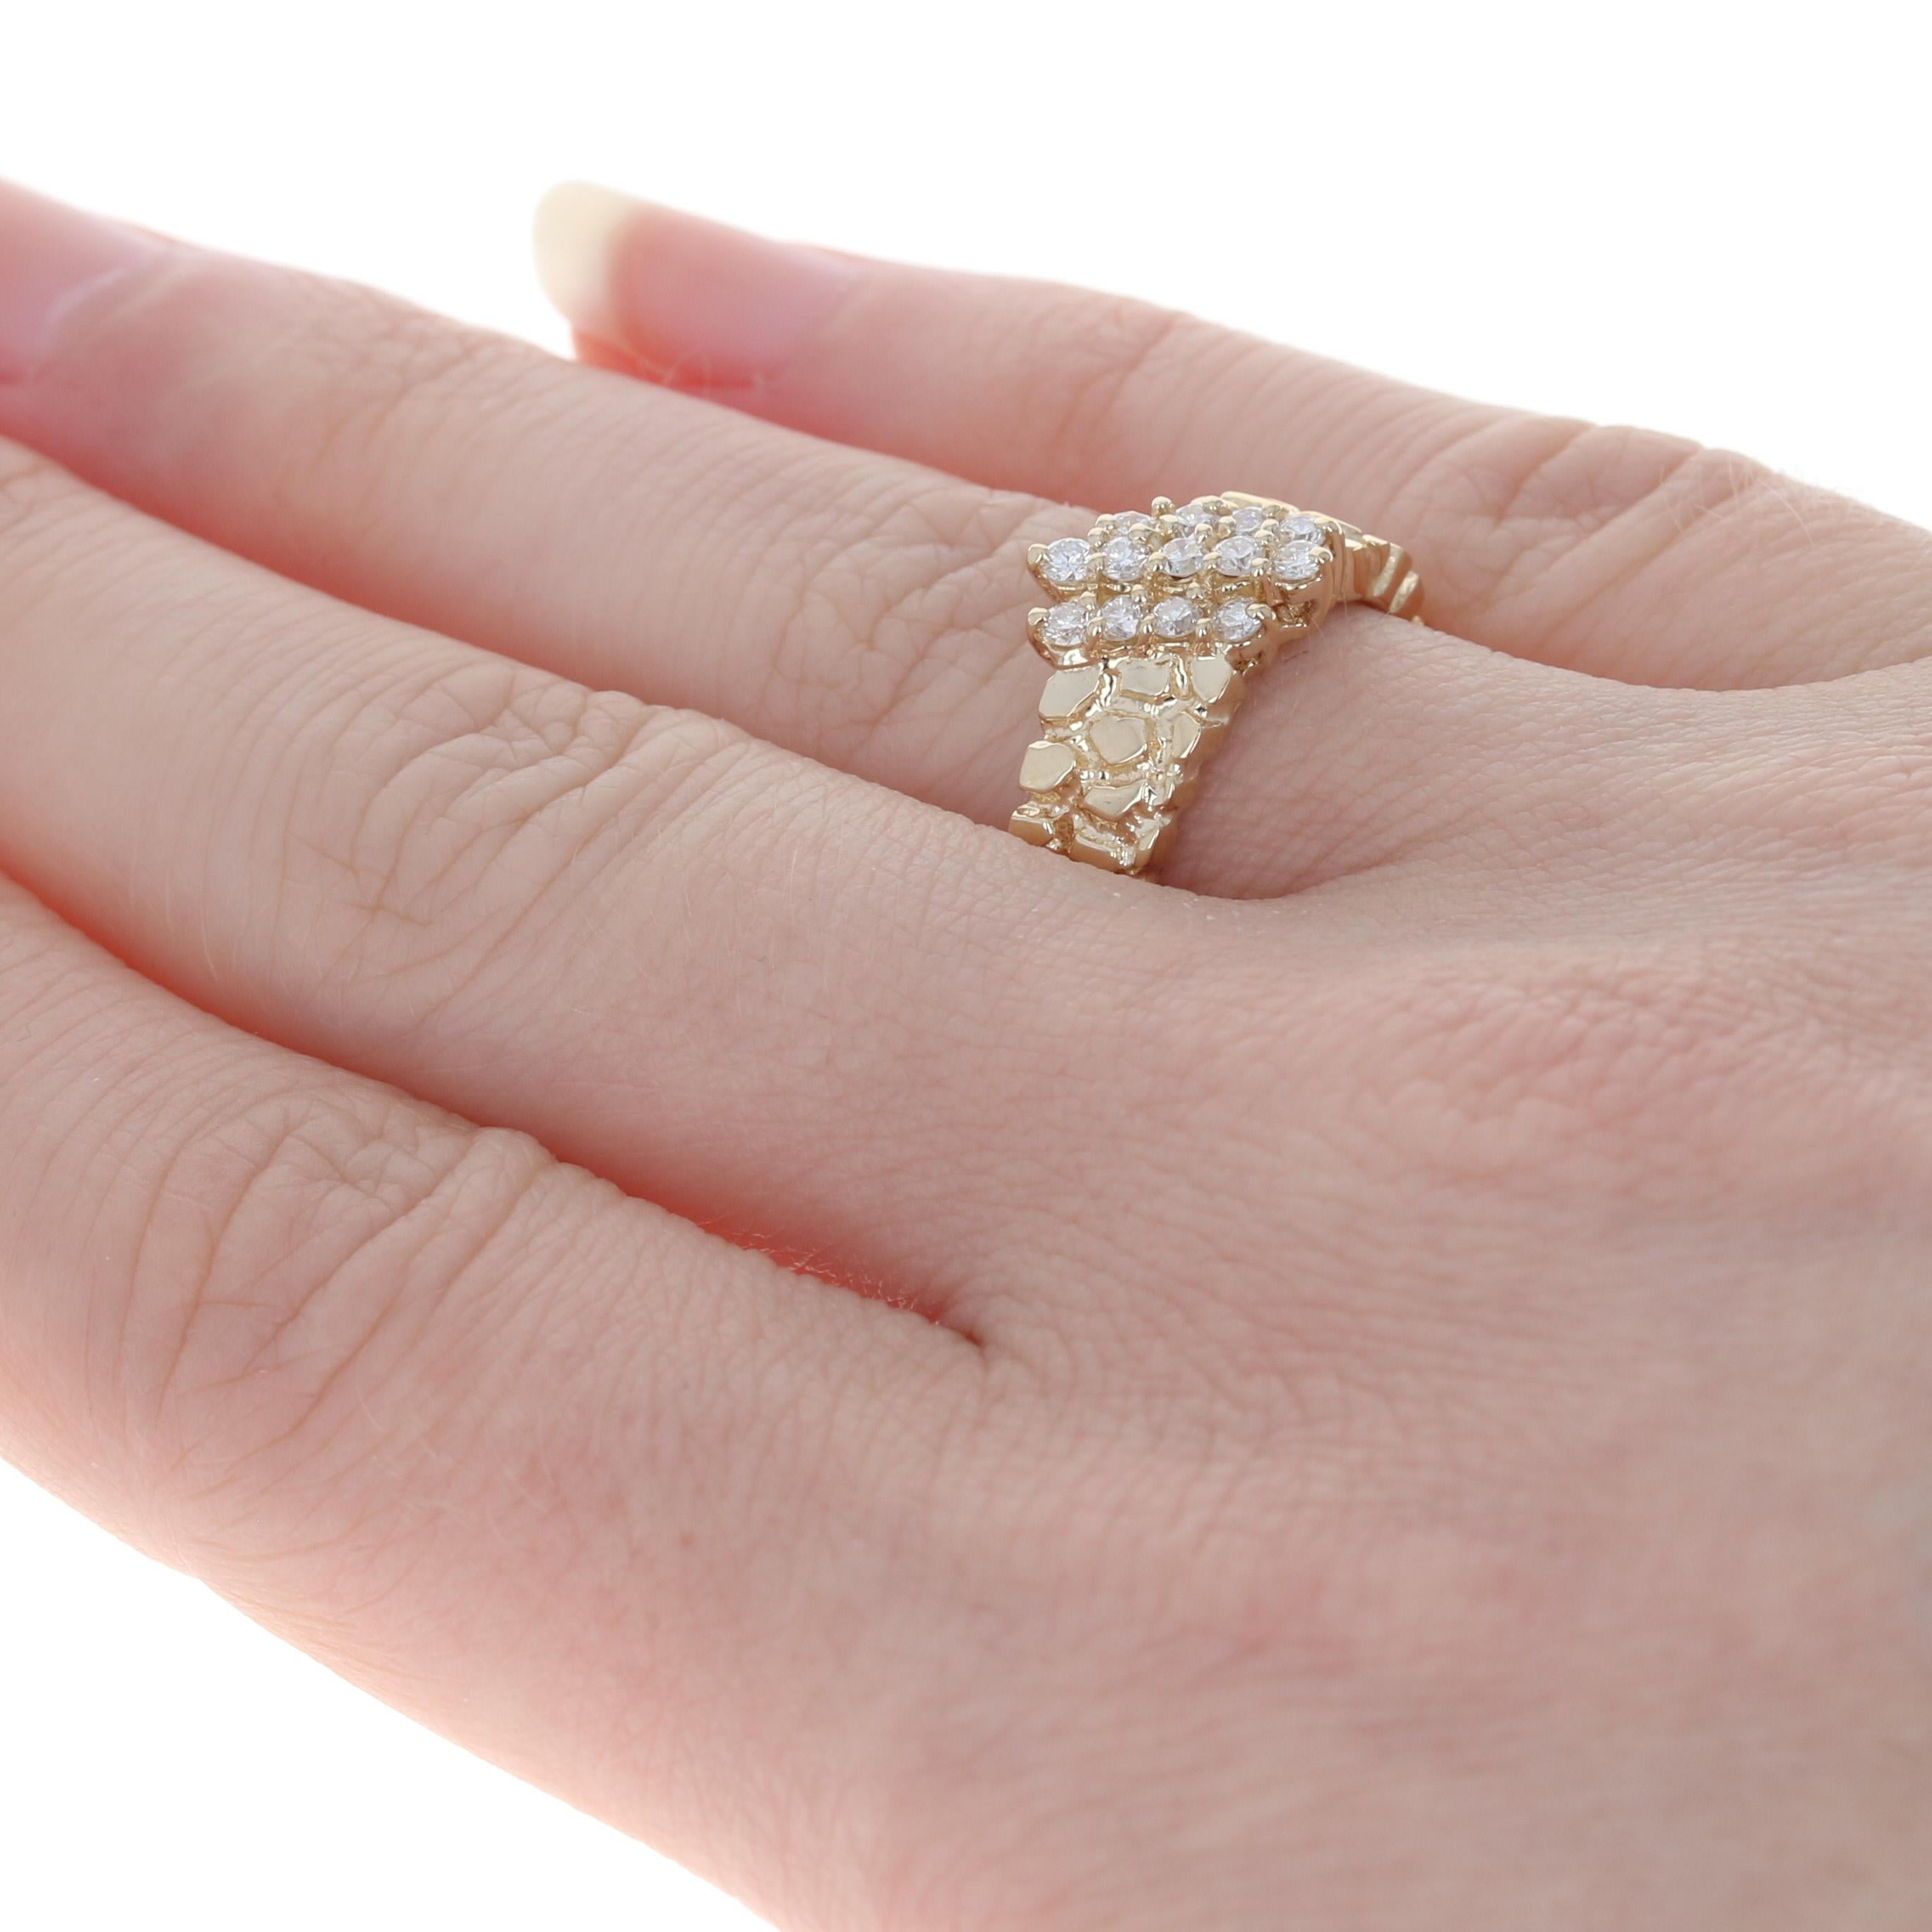 Uncut Yellow Gold Diamond Cluster Ring, 14k Round Brilliant Cut .35ctw Nugget Texture